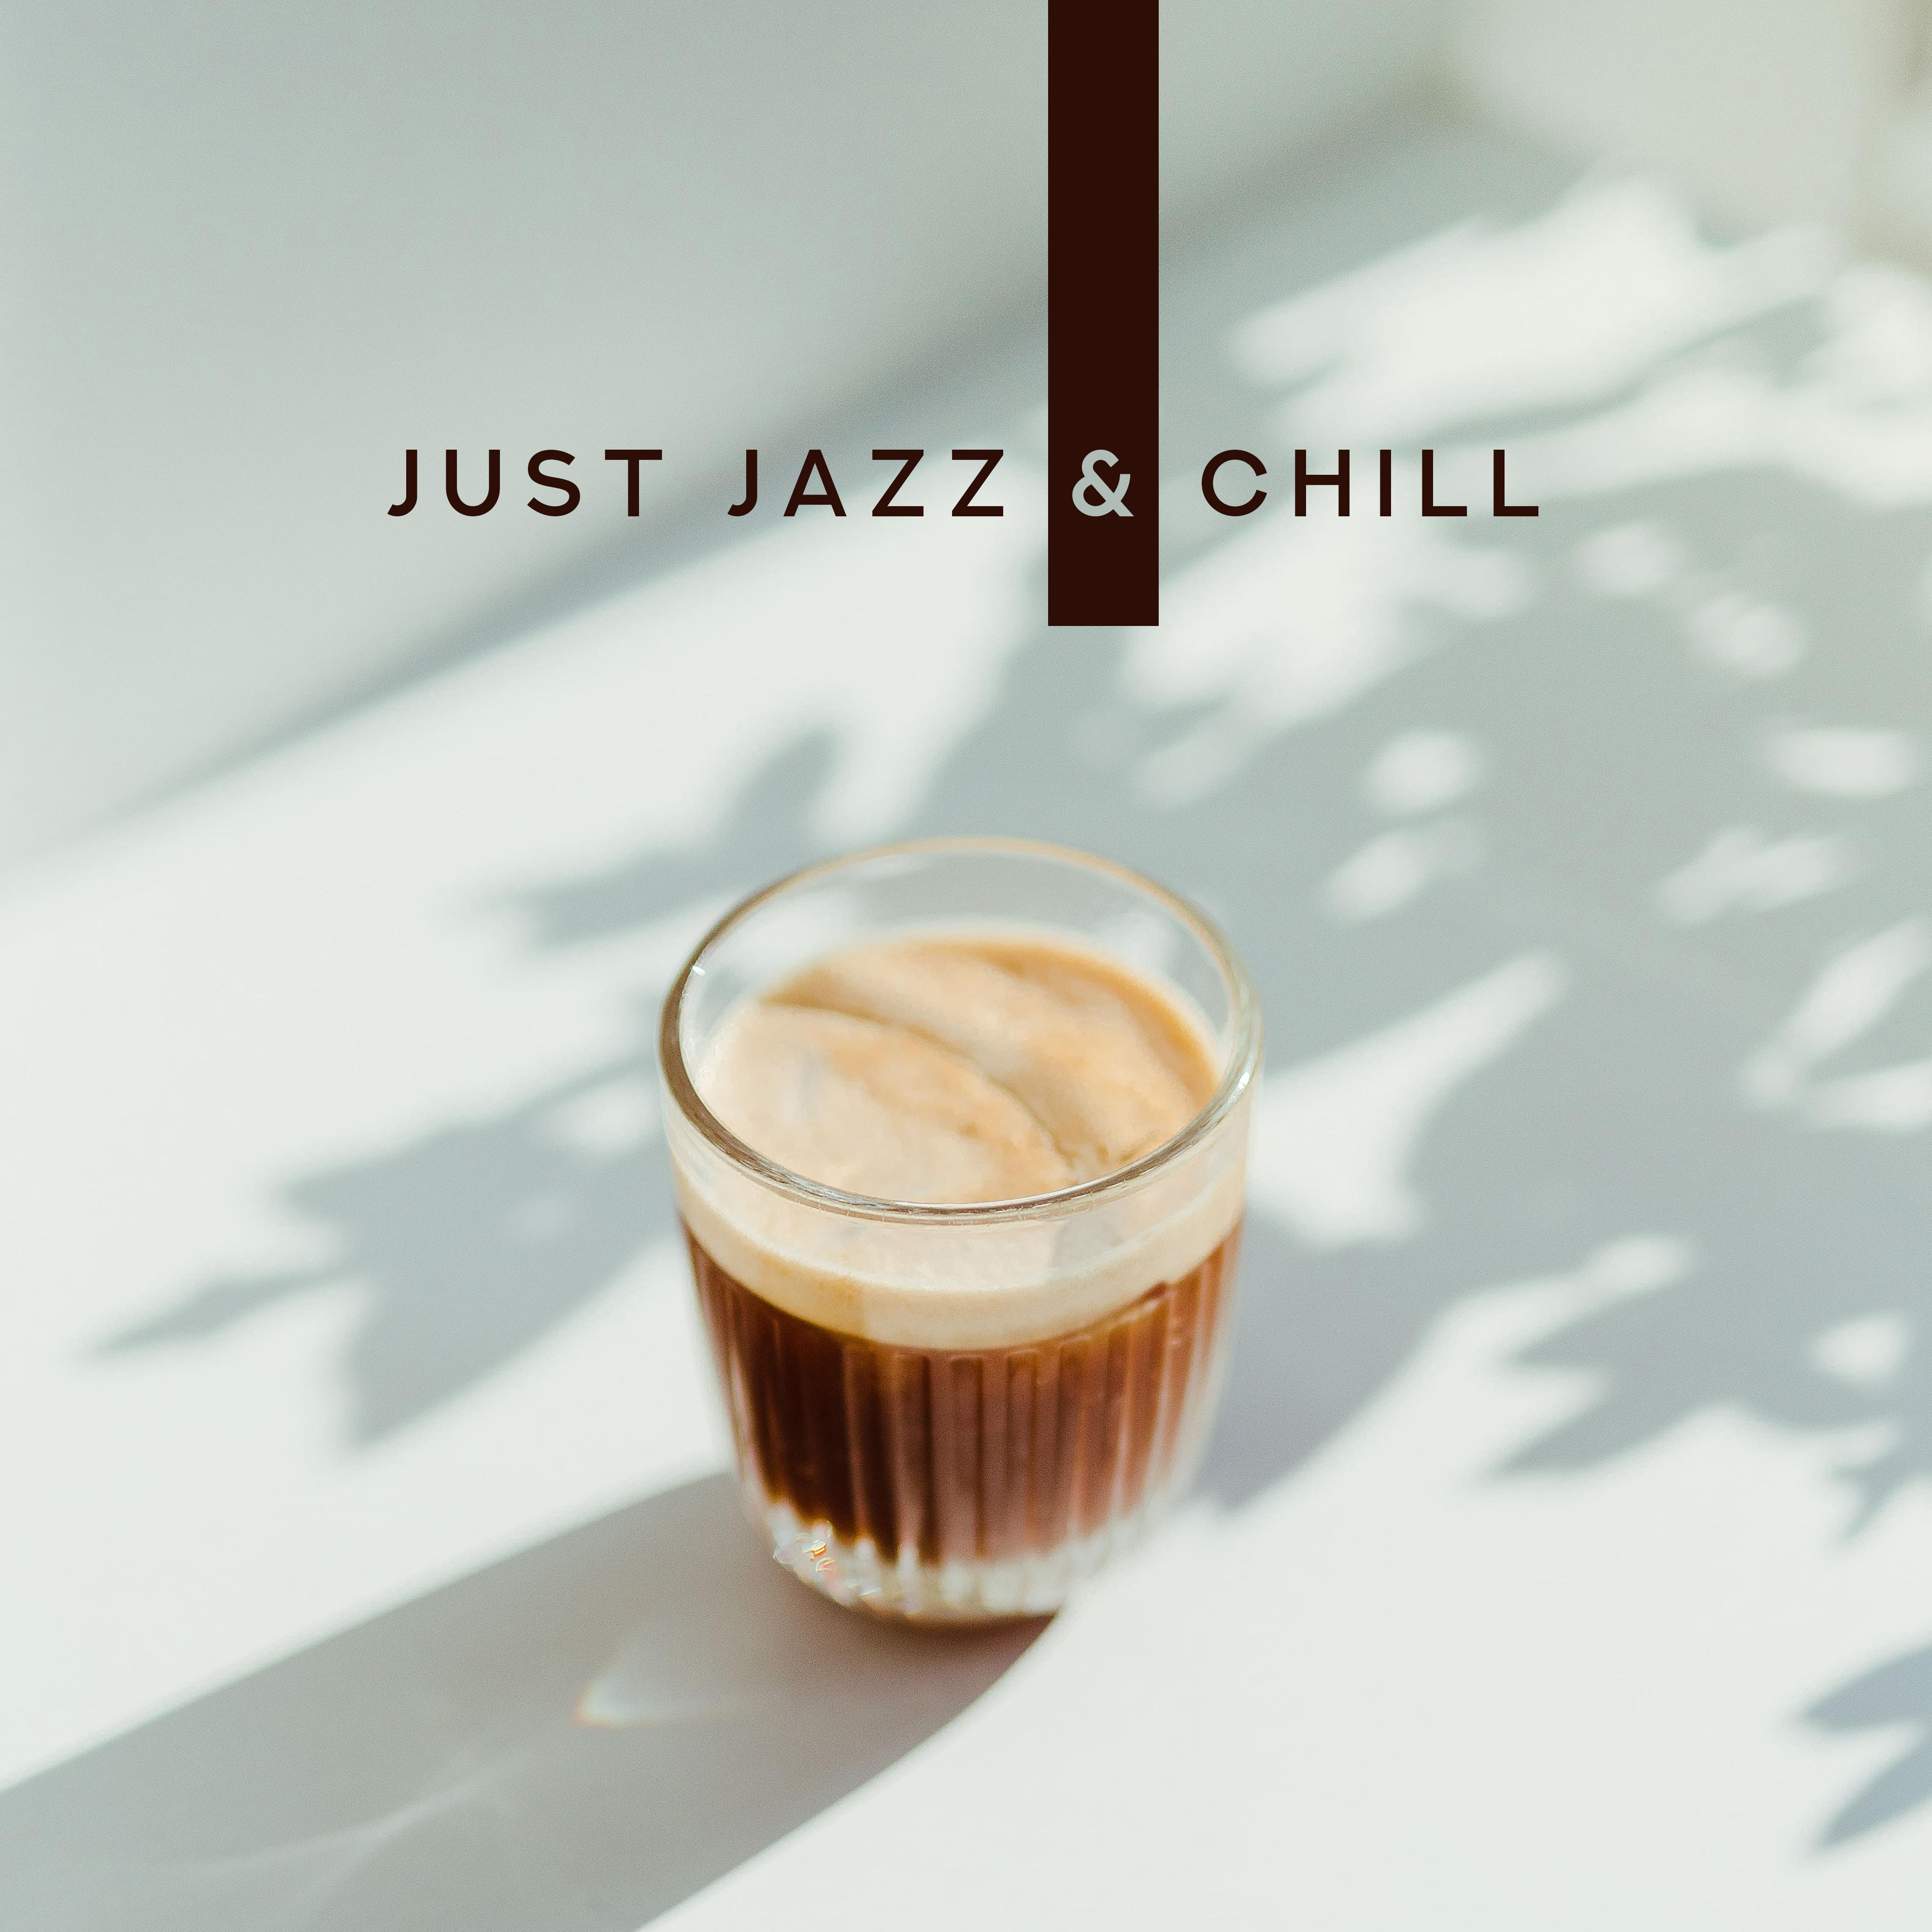 Just Jazz & Chill: Most Relaxing Smooth Jazz Music Compilation in 2019, Selection of Instrumental Tracks for Relaxation, Calming Down & Full Rest After Long Week